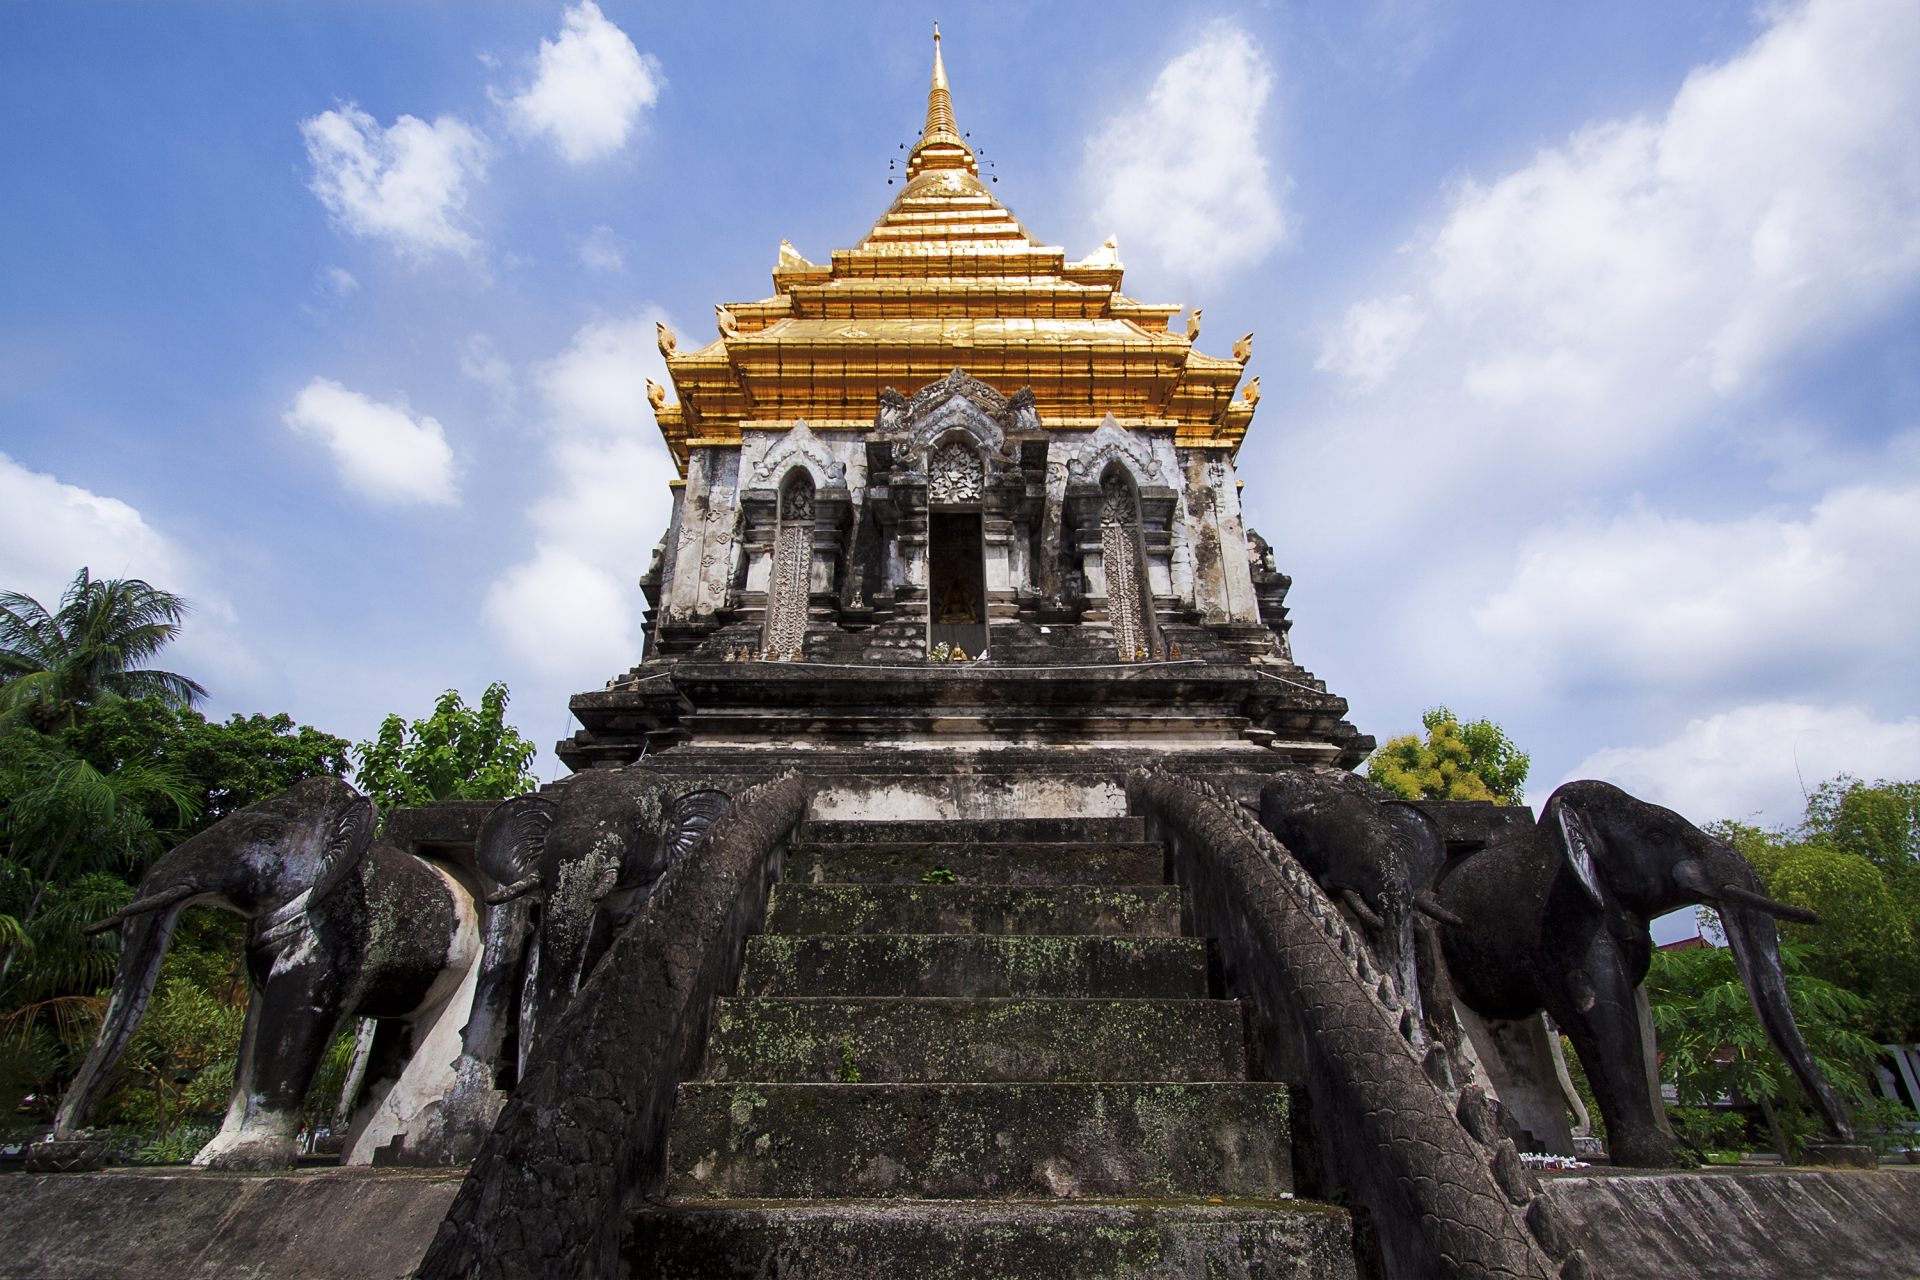 Chiang Mai Temples - Highlights of Thailand